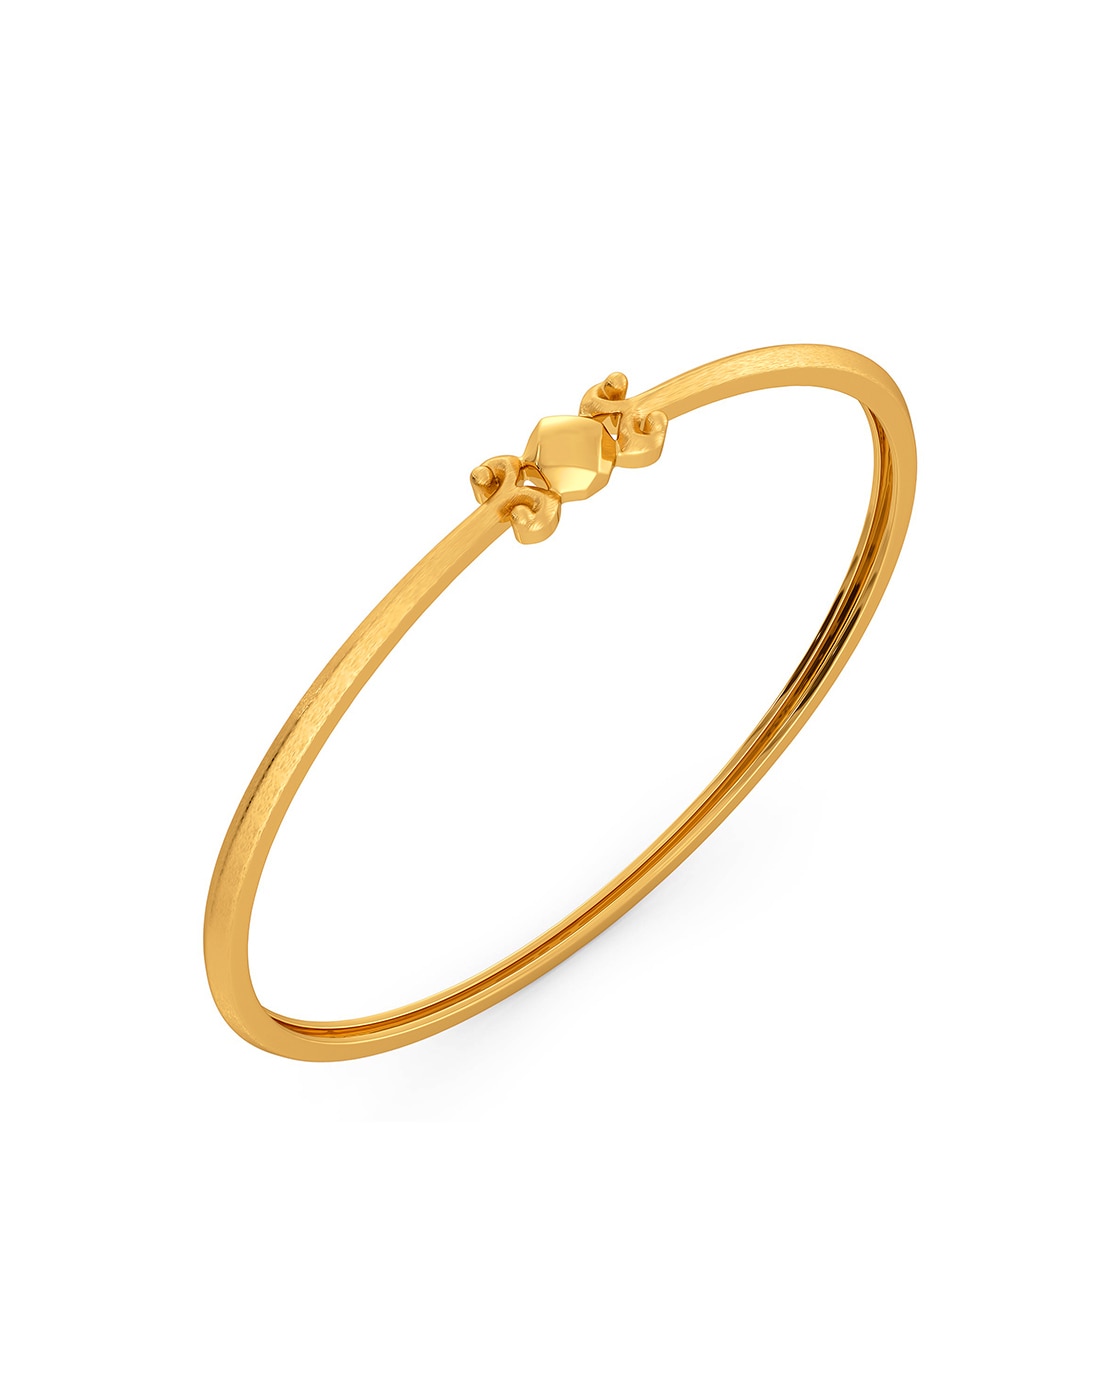 Adjustable High Polished 24K Yellow Gold Plated Sizze Baby Bangles Egyptian  Shiny Bracelets For Kids And Children From Yolandajewelry, $3.63 |  DHgate.Com